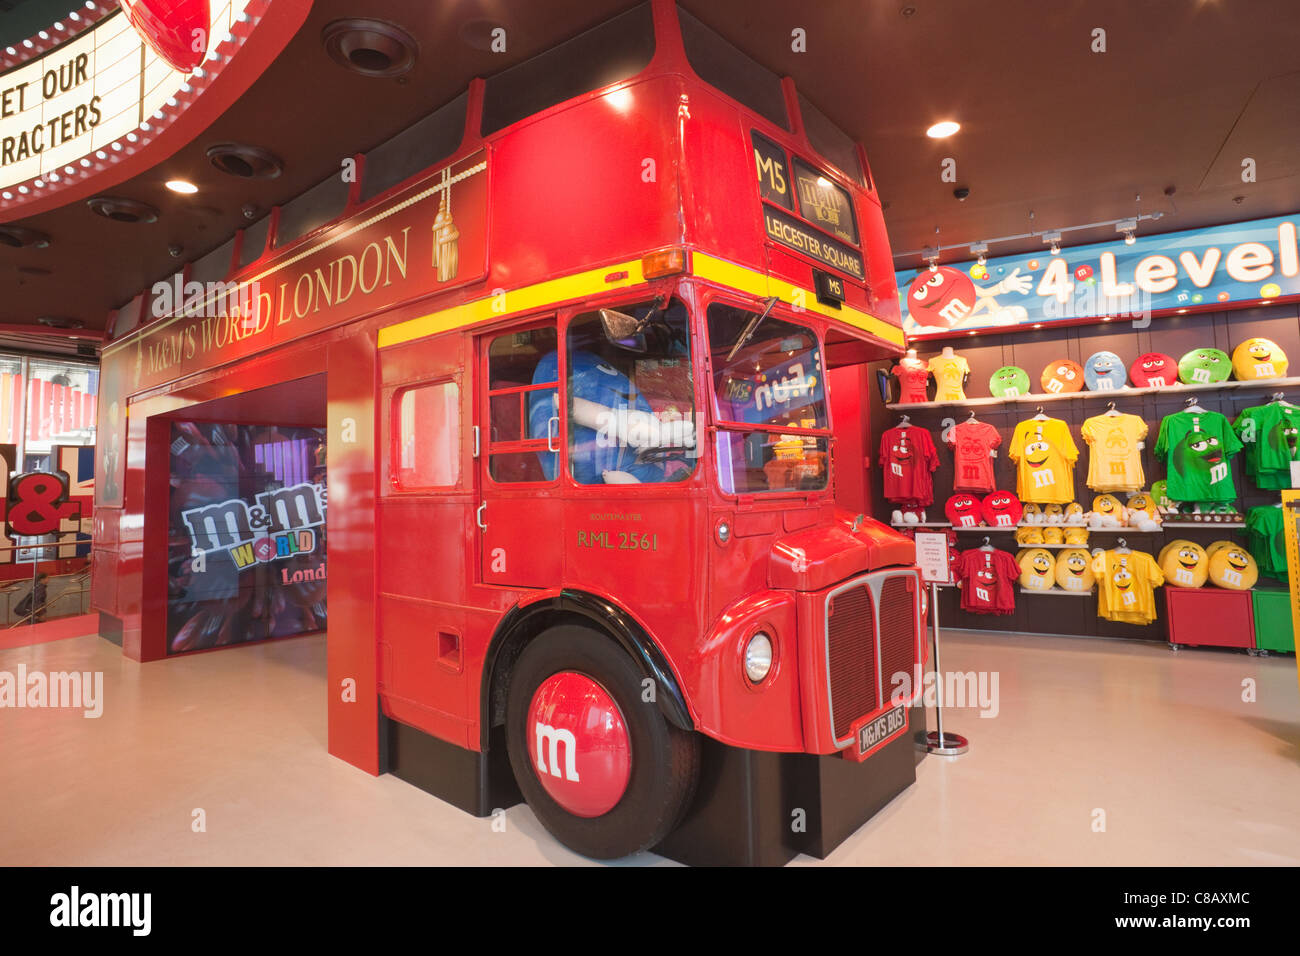 England London Leicester Square Interior Display Of M M World Stock Photo Alamy